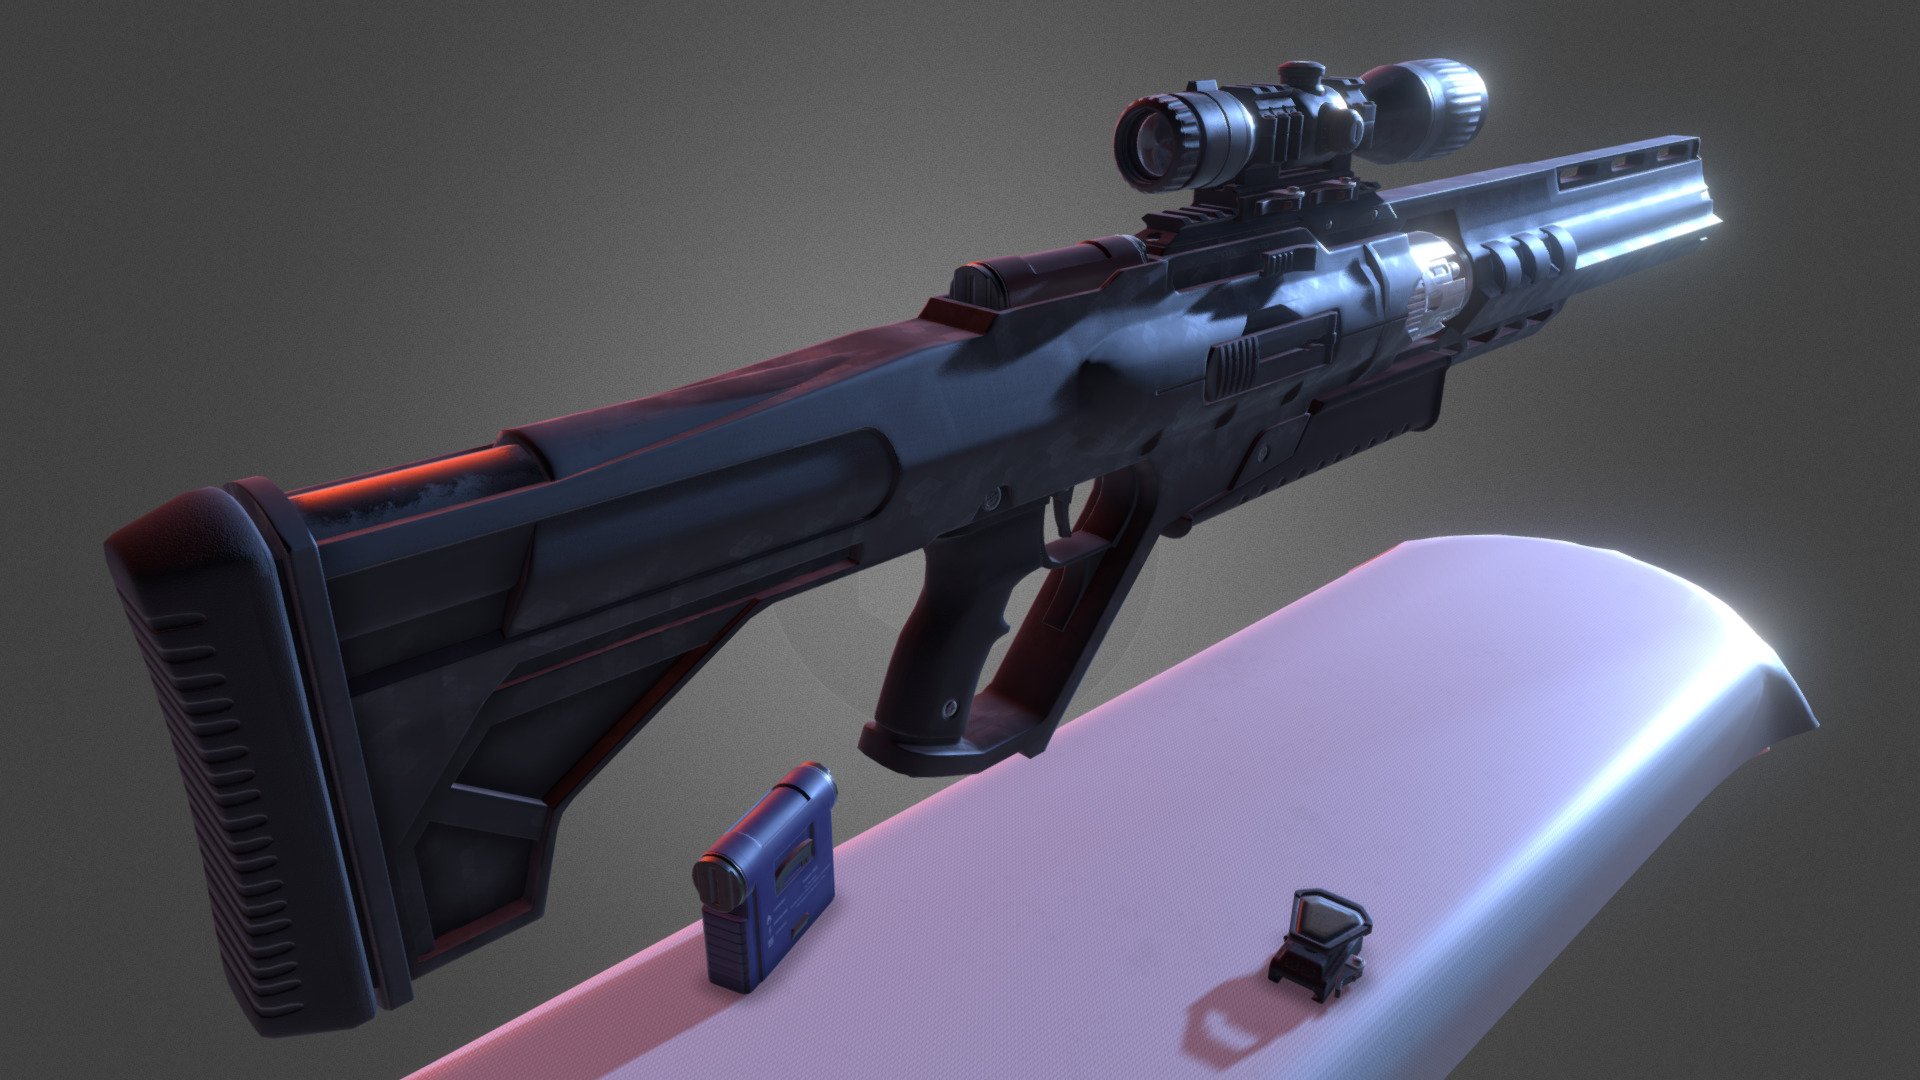 Animated Sci-Fi Laser Rifle Showcase. Based on concepts by Peterku 3d model